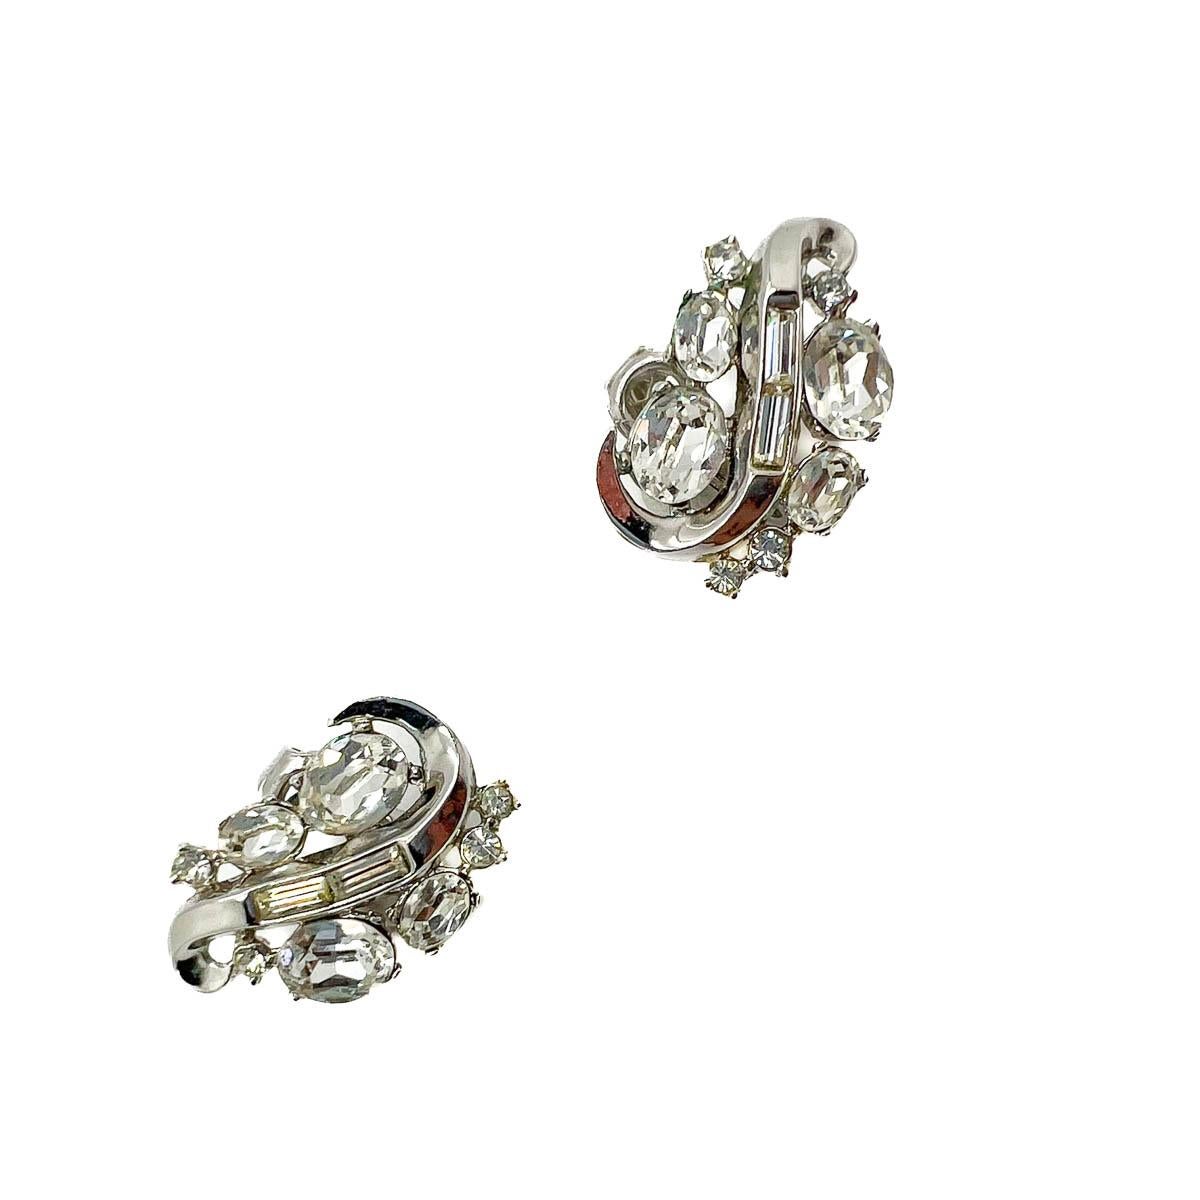 A pair of Vintage Crown Trifari Crystal Swirl Earrings. A stone rich design with large opulent oval crystals accented with rhodium plated detailing set with baguette crystals. A forever classic and totally chic addition to your jewel